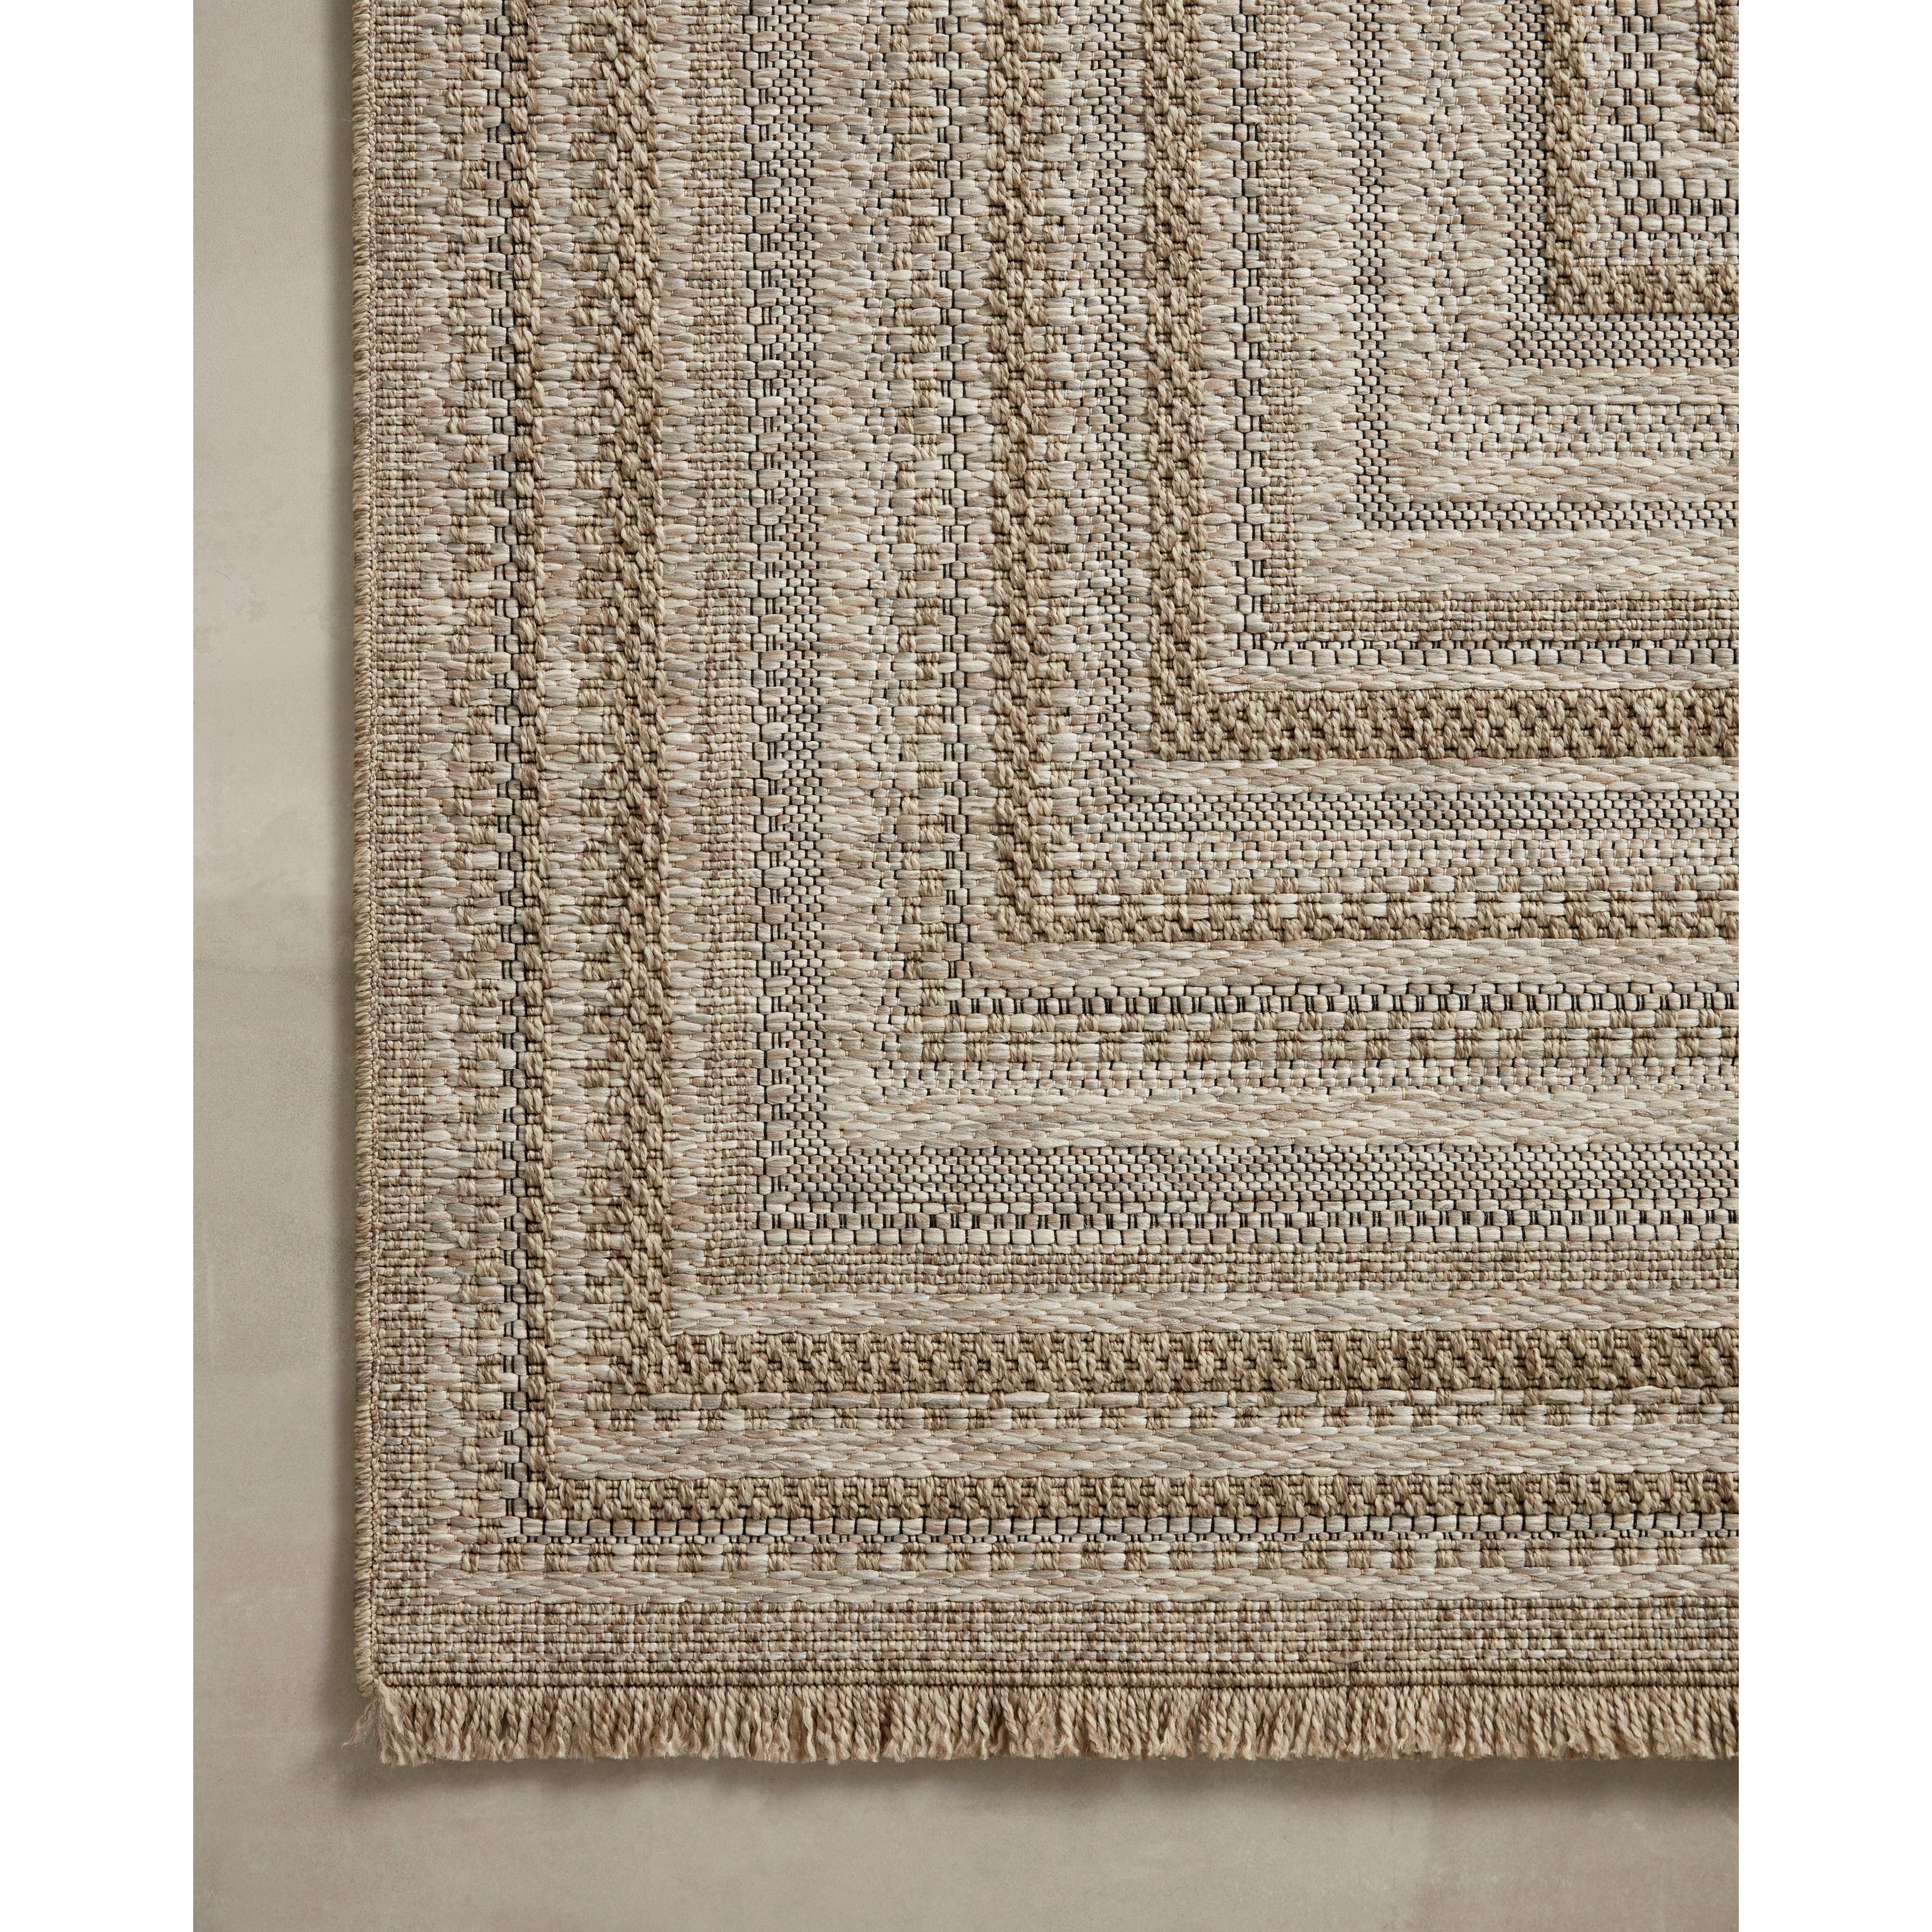 Made for sunny days ahead, the Dawn Natural DAW-01 rug is an indoor/outdoor rug that looks like a woven sisal rug but is power-loomed of 100% polypropylene, which makes it water- and mildew-resistant (so it's ready for rainy days ahead, too). Amethyst Home provides interior design, new home construction design consulting, vintage area rugs, and lighting in the Newport Beach metro area.